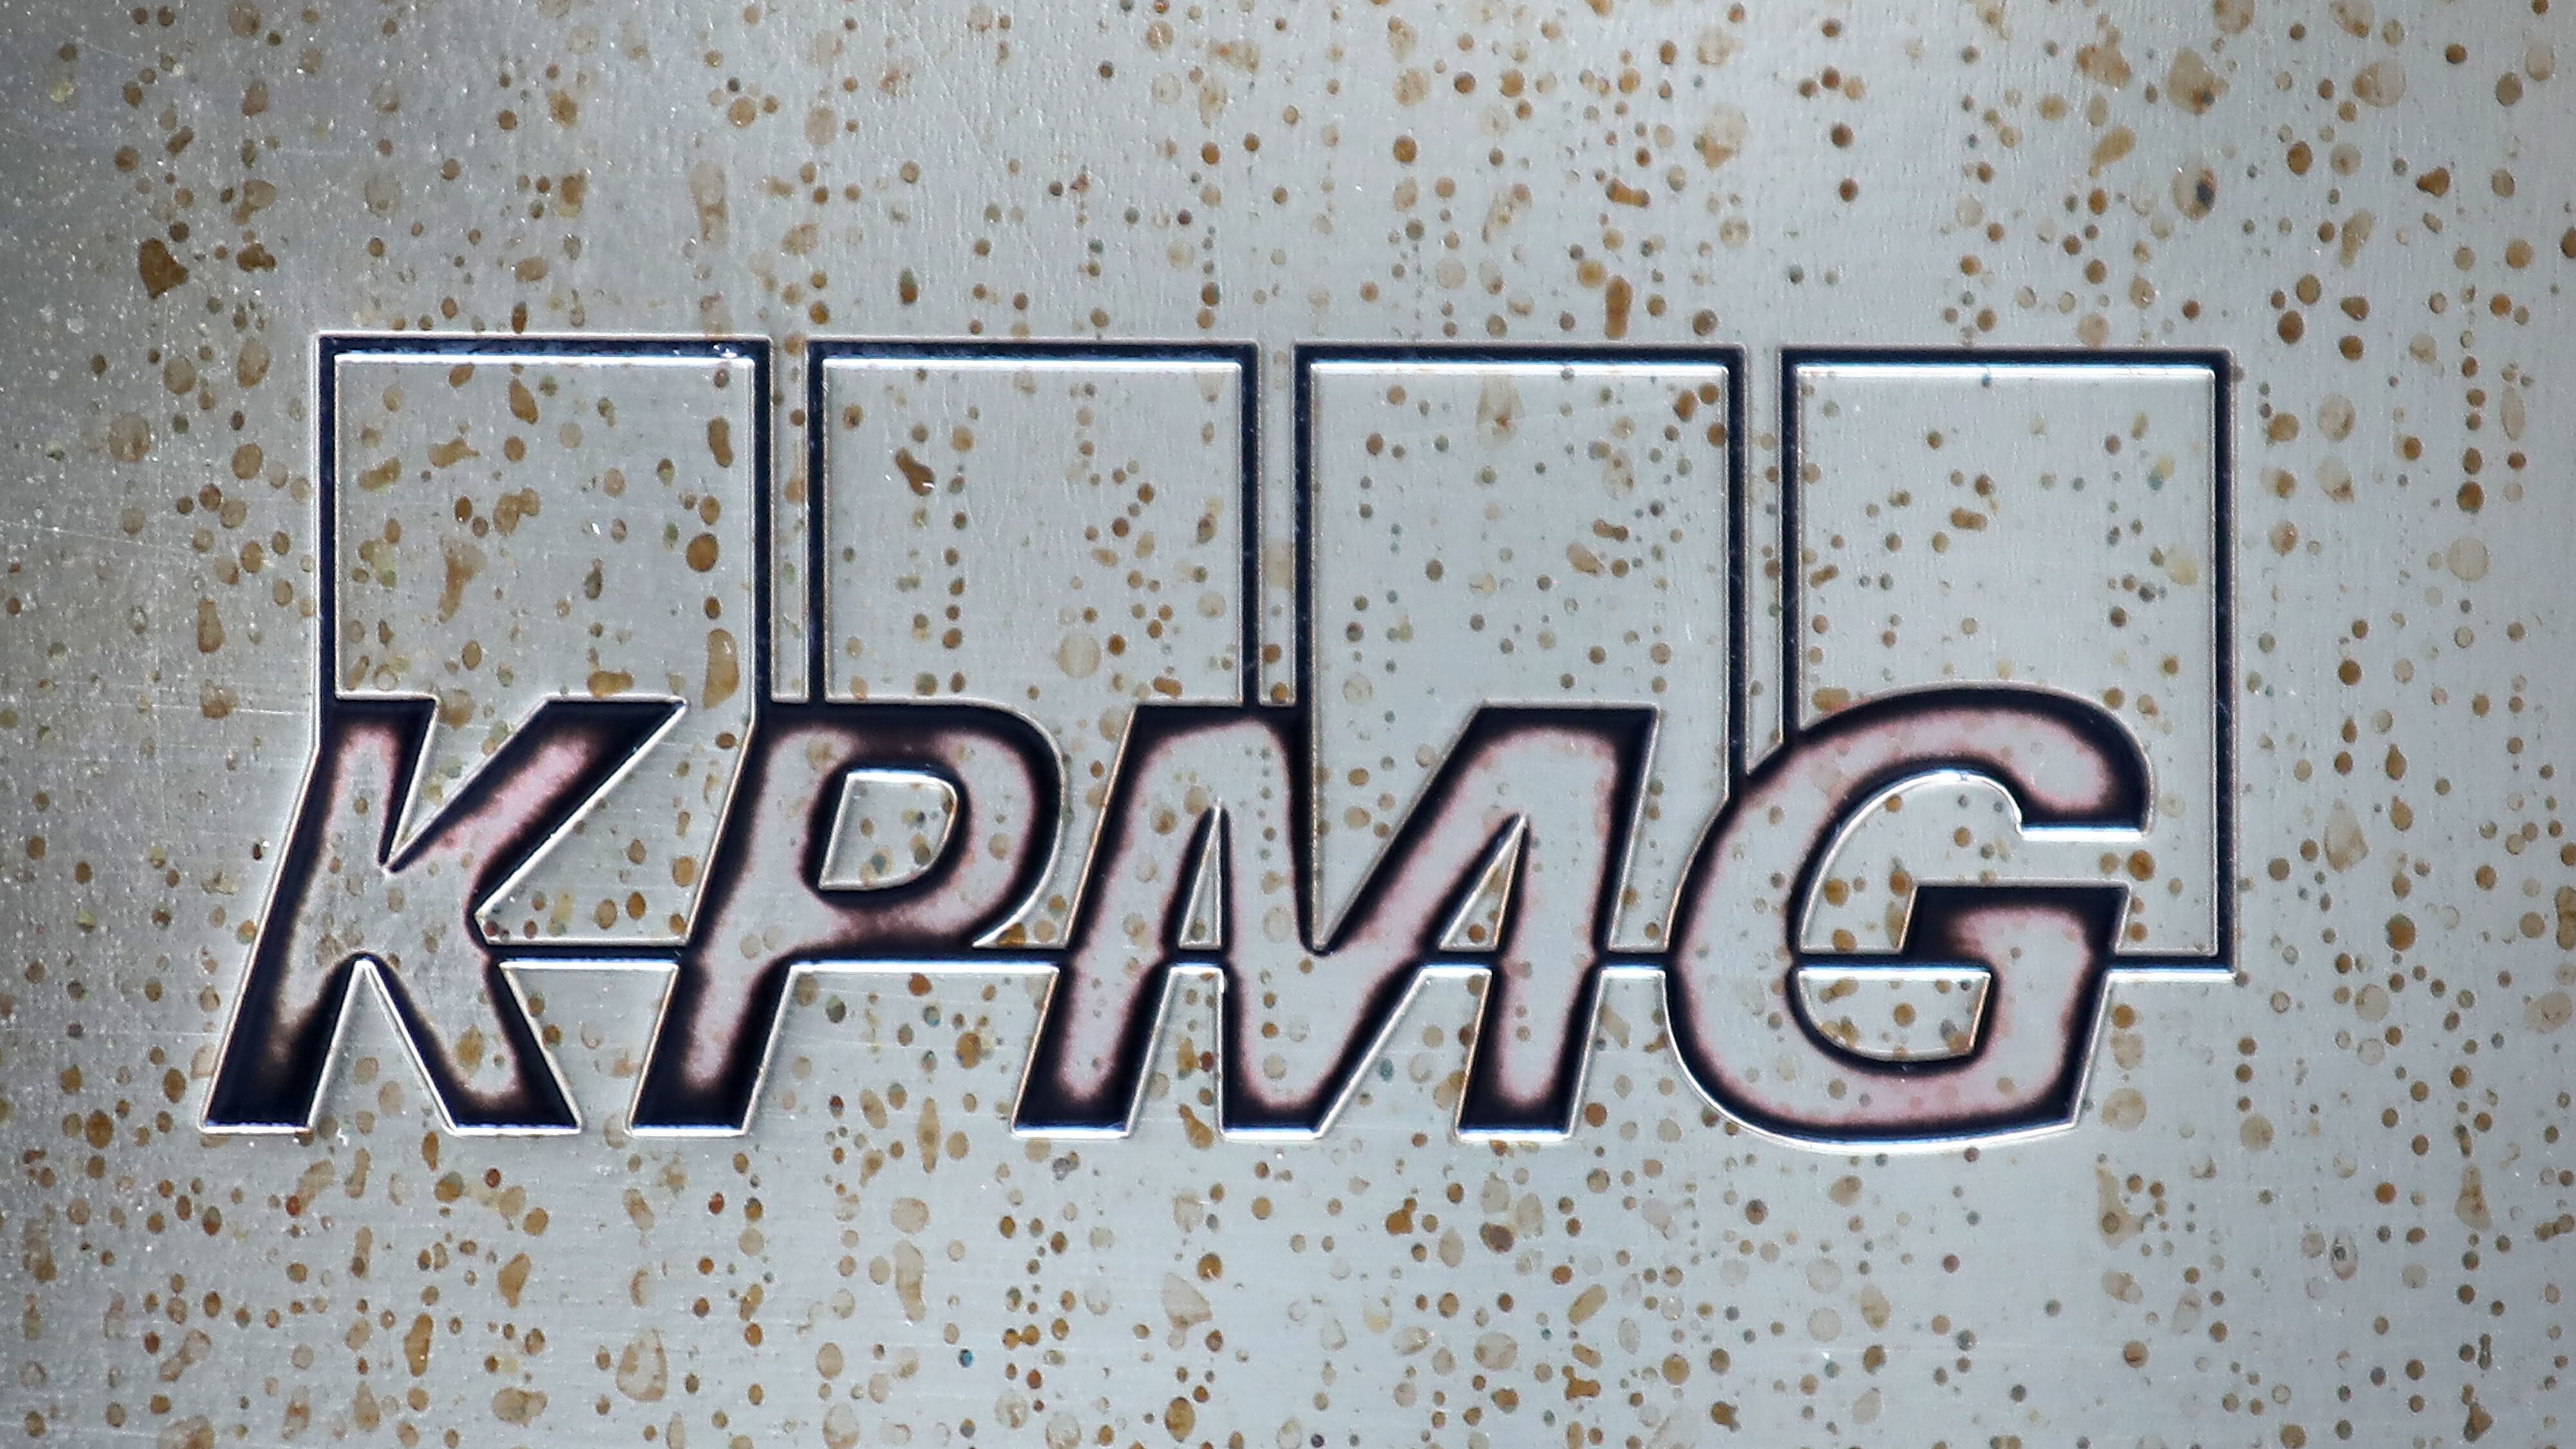 Professional services giant KPMG has been fined almost £1.5m by the UK accounting watchdog over its audit of advertising firm M&C Saatchi